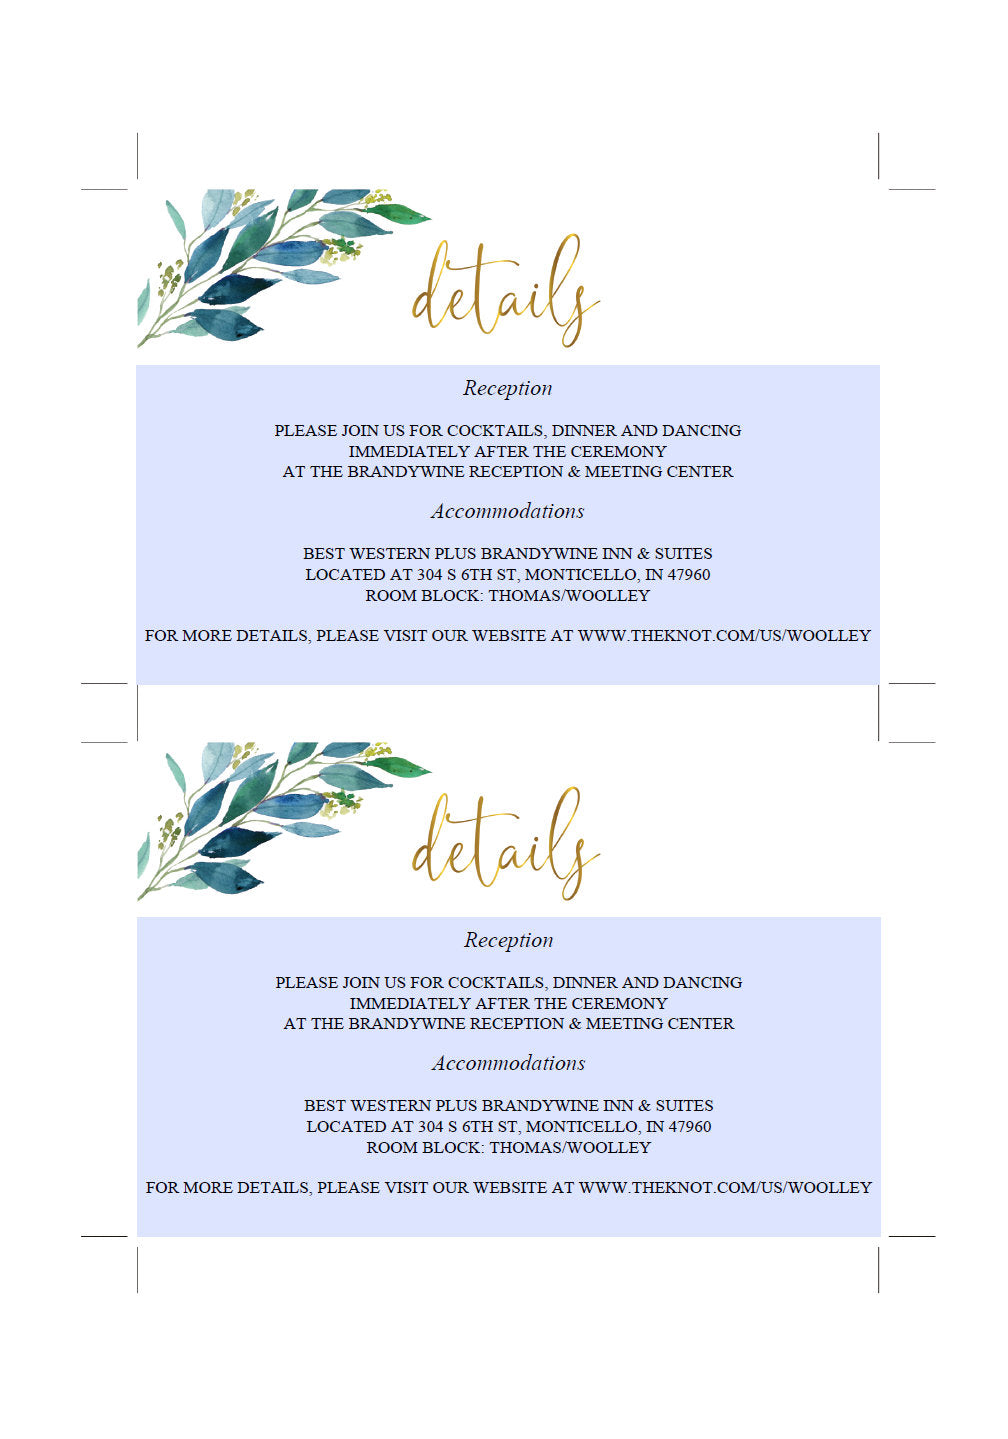 Wedding Details Card Template, Instant Download, Information Card, Wedding Info Card, Dusty Blue Card, Details Template, Gold   - Elaine RSVP & DETAILS CARDS SAVVY PAPER CO